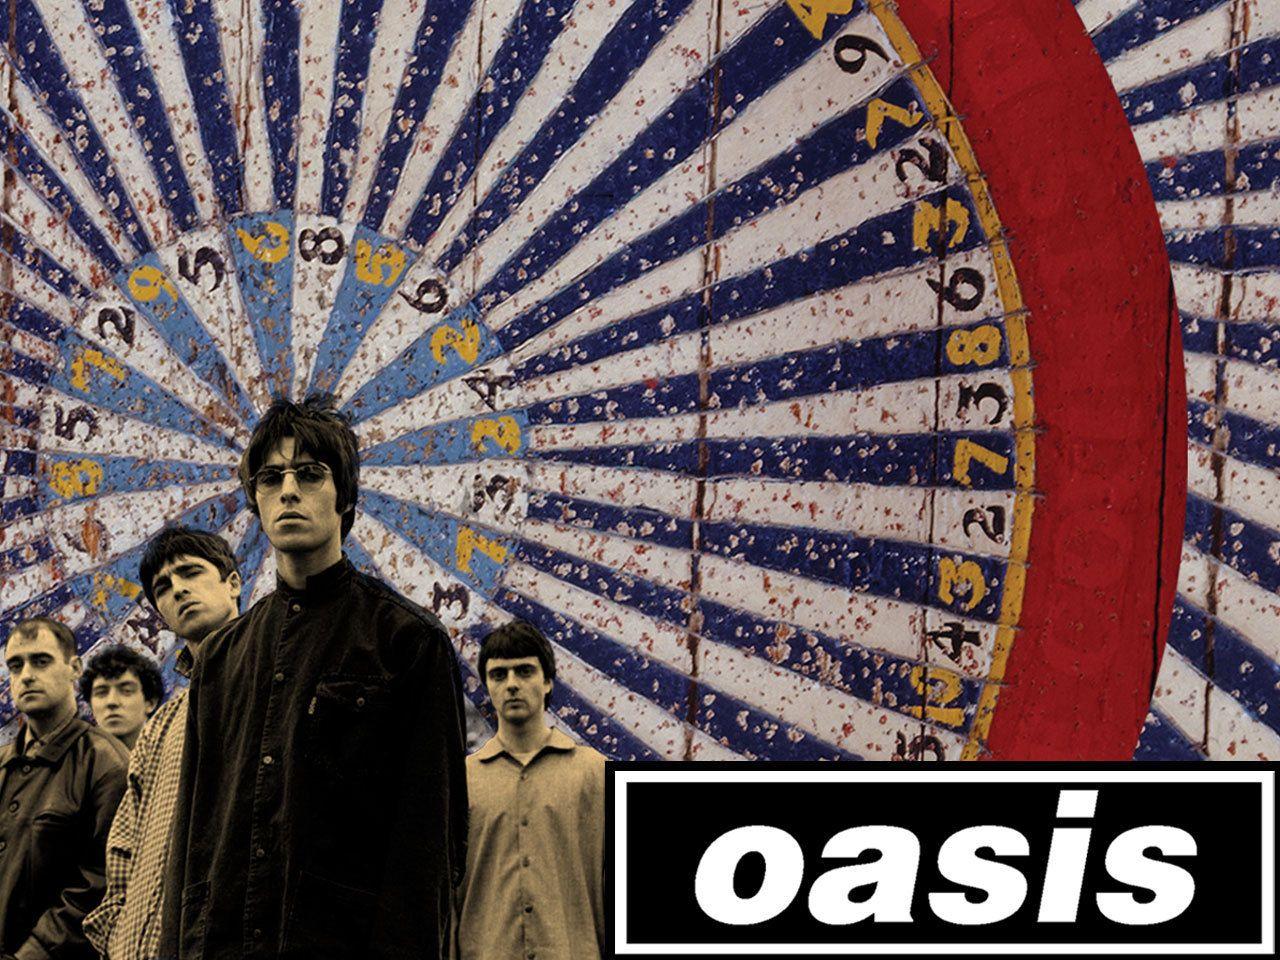 Oasis Wallpaper. Music. More Oasis ideas